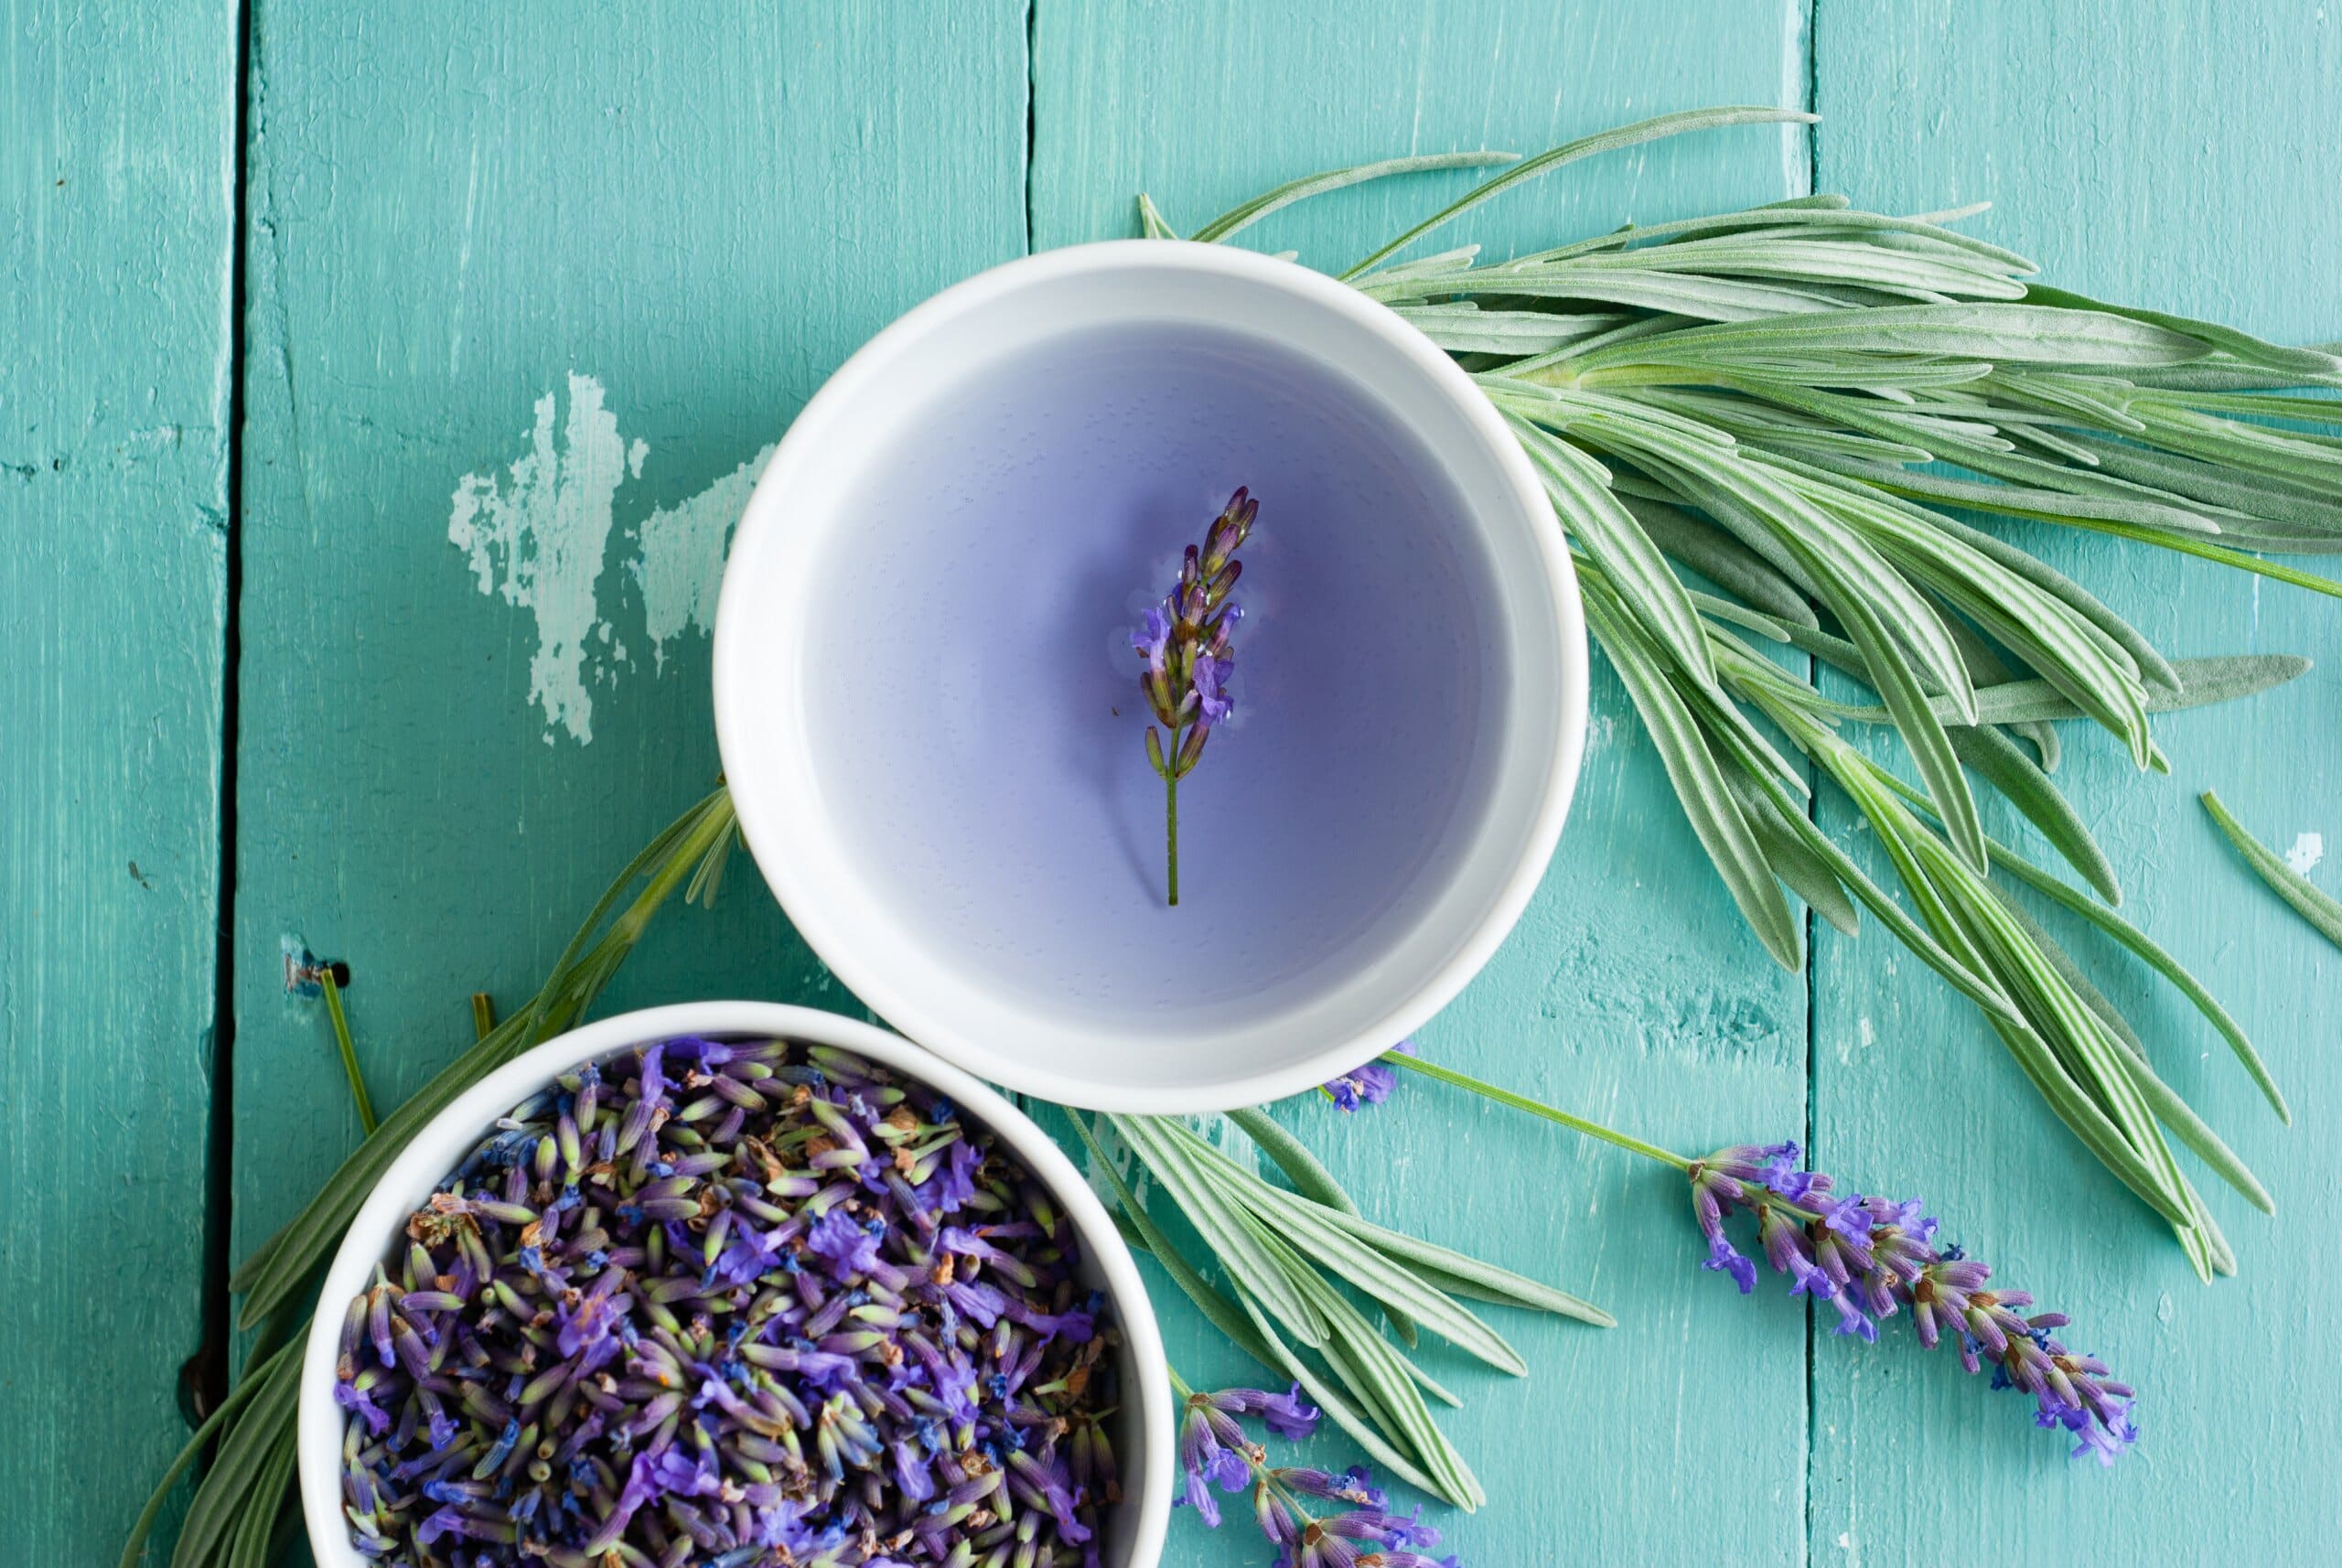 Cup of lavender tea with sprigs of lavender surrounding it, on a light blue wooden table.